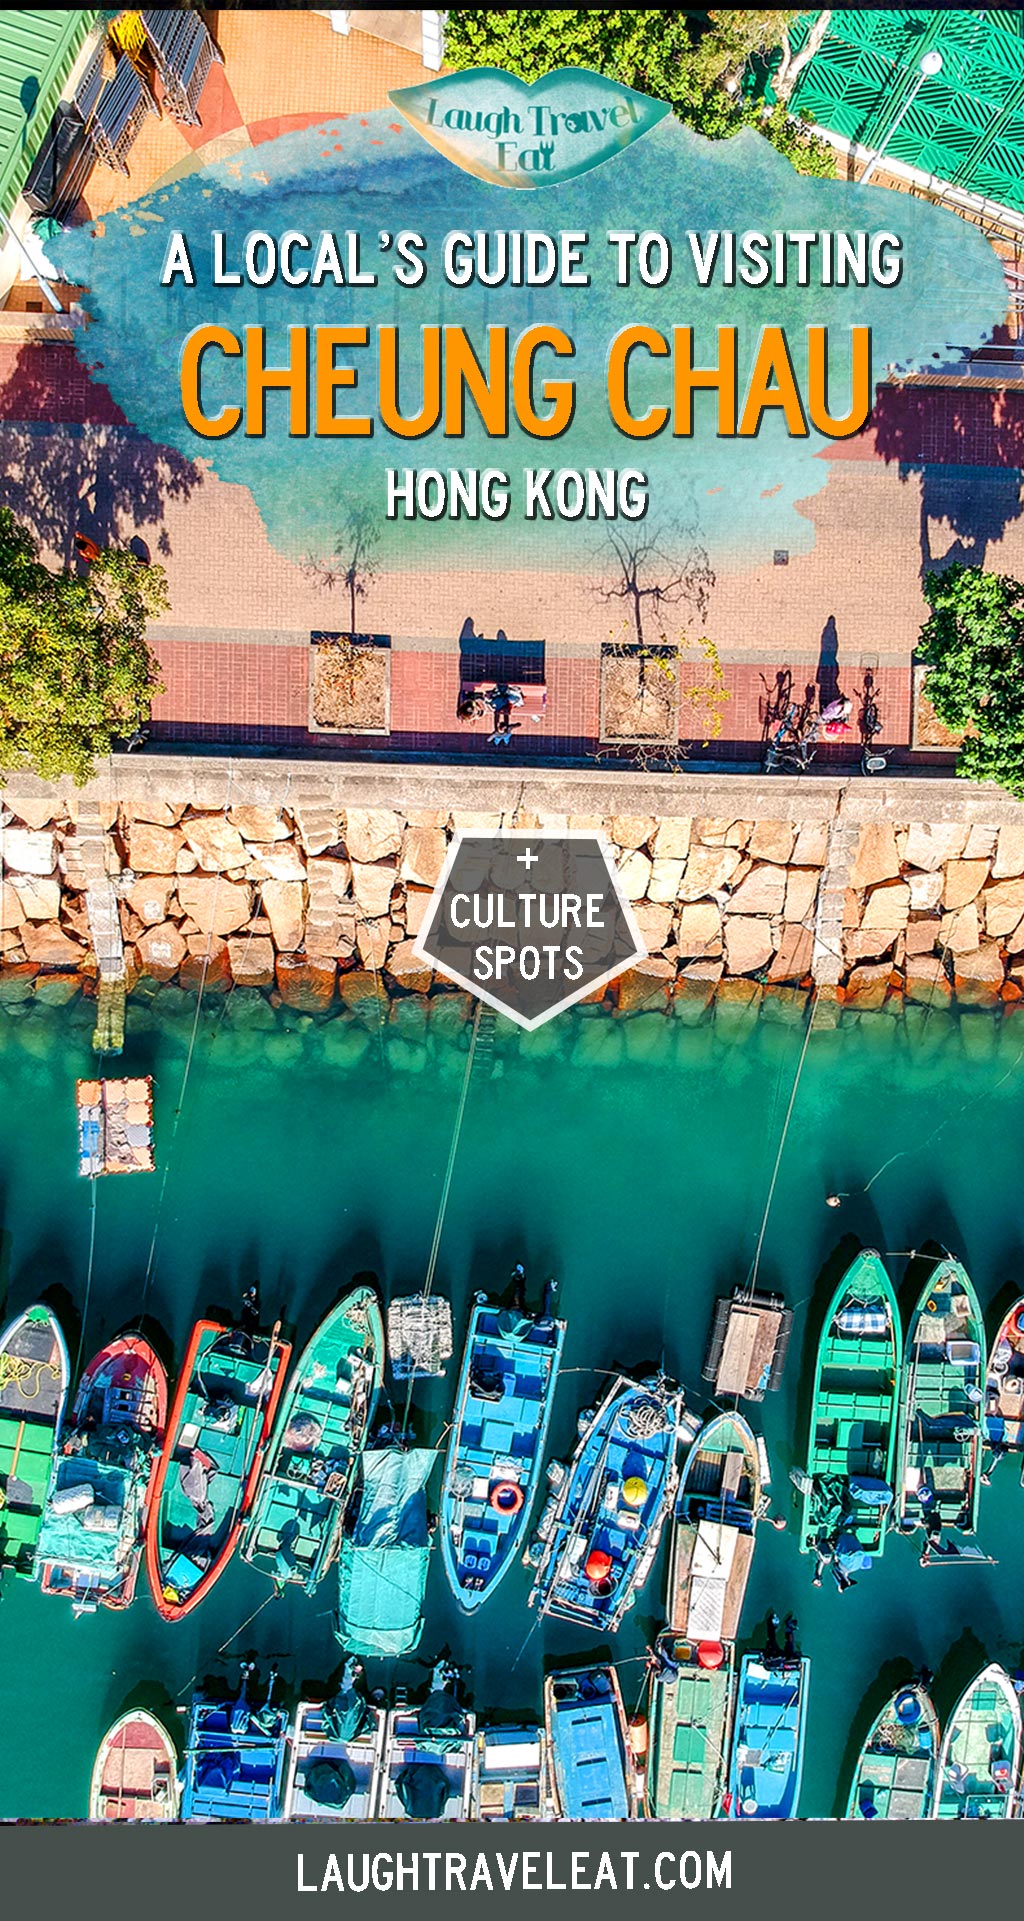 Cheung Chau is a fishing village known for its slower pace of life and seafood, as well as home to several historical sights. If you are looking for a day trip in Hong Kong that’s not too taxing with variety, Cheung Chau is the one for you! #CheungChau #HongKong